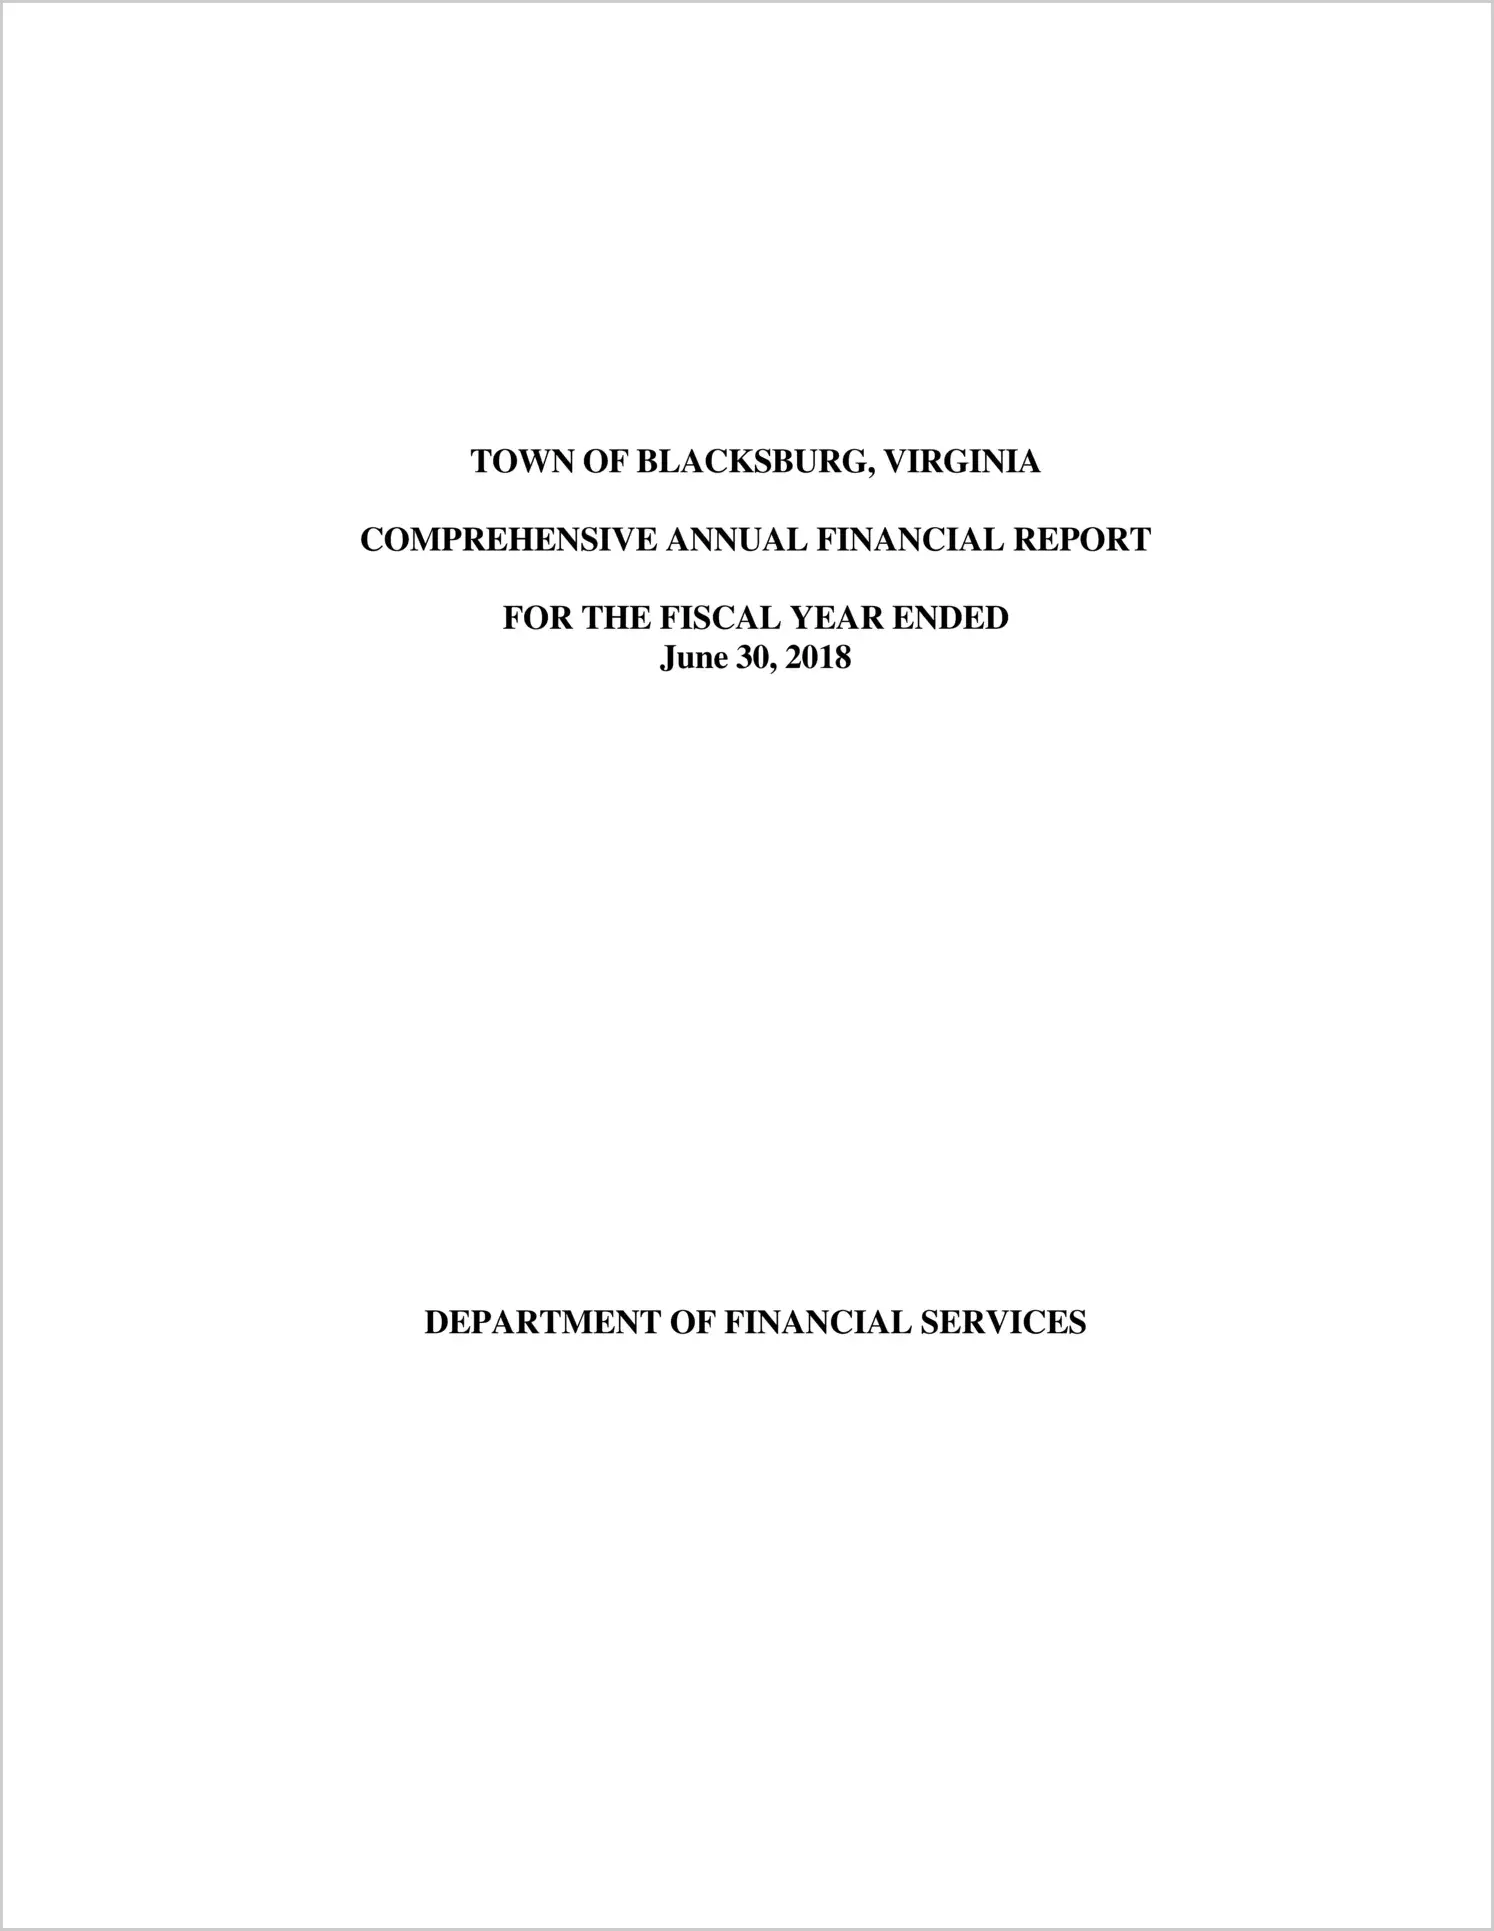 2018 Annual Financial Report for Town of Blacksburg